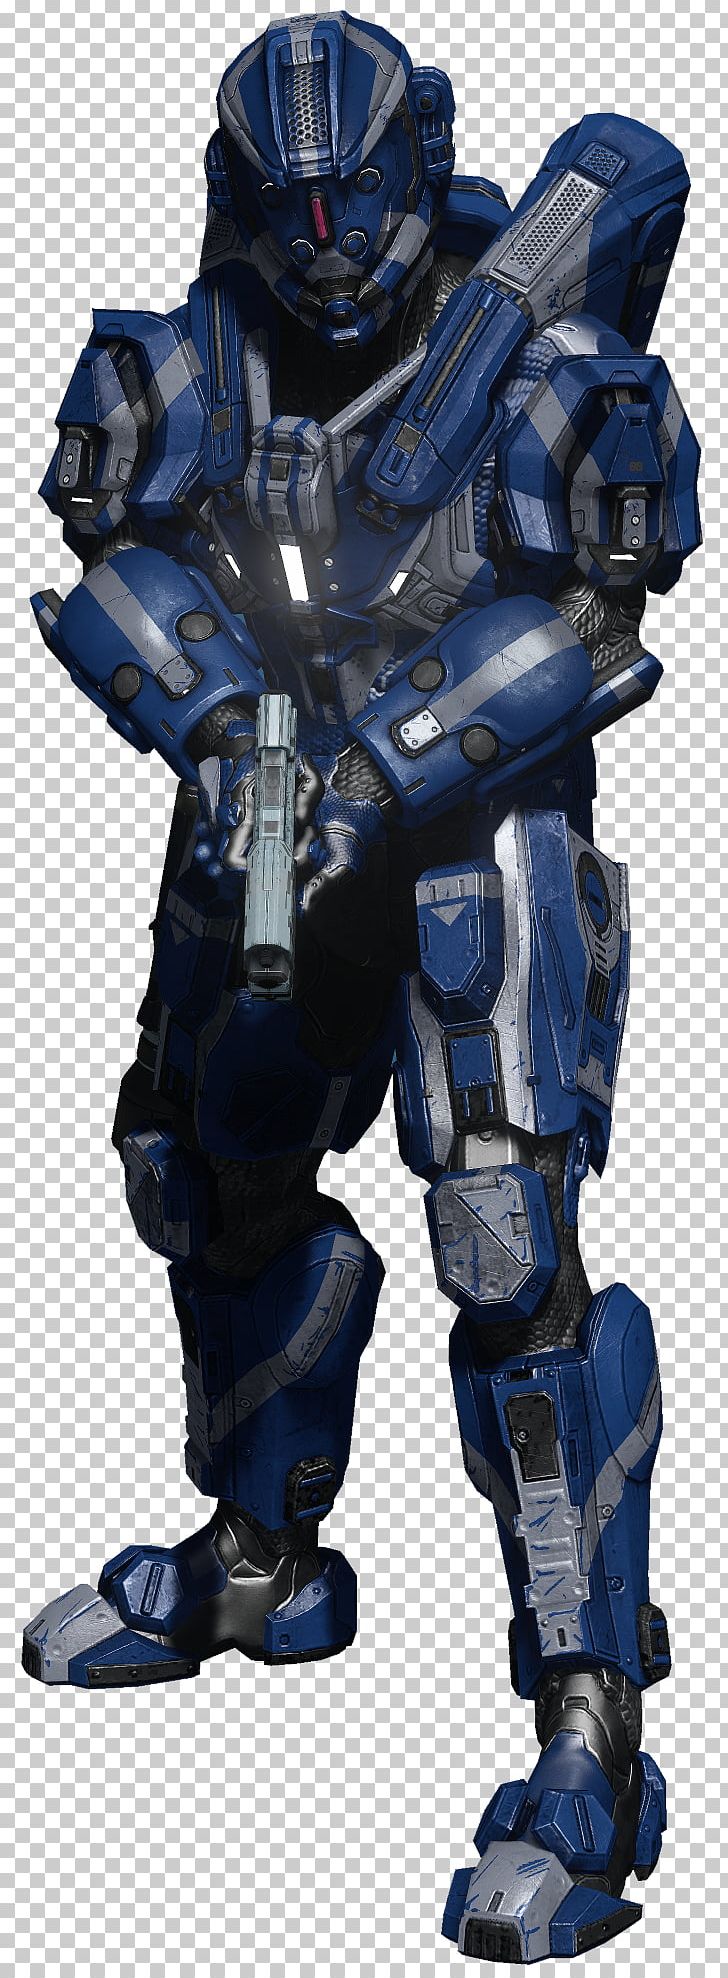 Halo 4 Halo 5: Guardians Video Game Mod Spartan PNG, Clipart, Action Figure, Armour, Bungie, Figurine, Gaming Free PNG Download